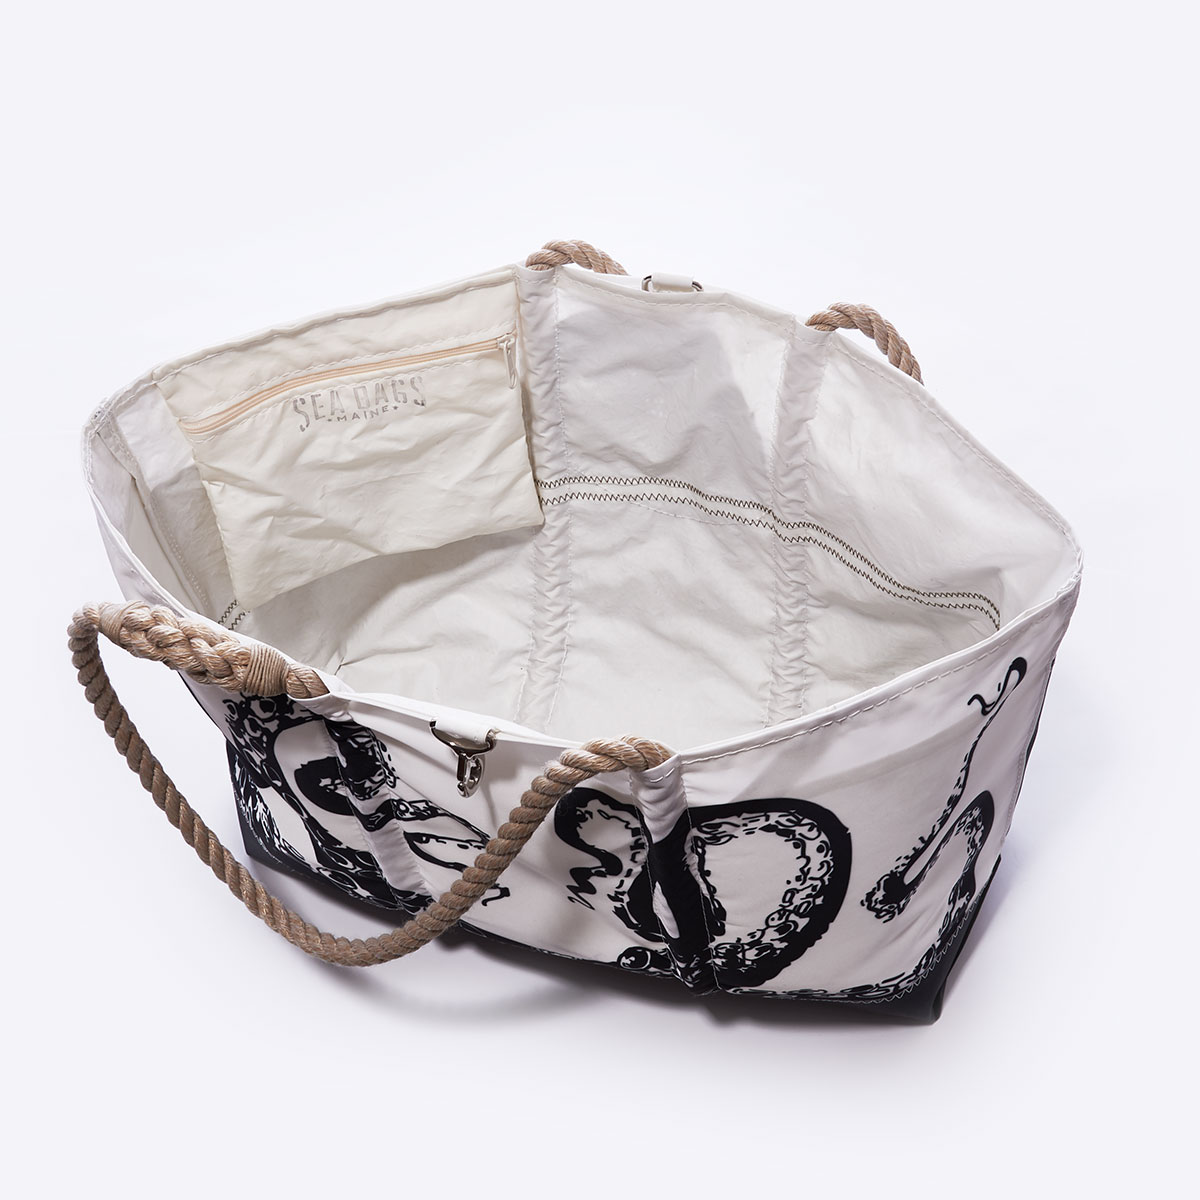 inside view showing interior zippered pocket: black legs of an octopus reach up to the top of this recycled sail cloth tote, with a solid black along the bottom, and hemp rope handles